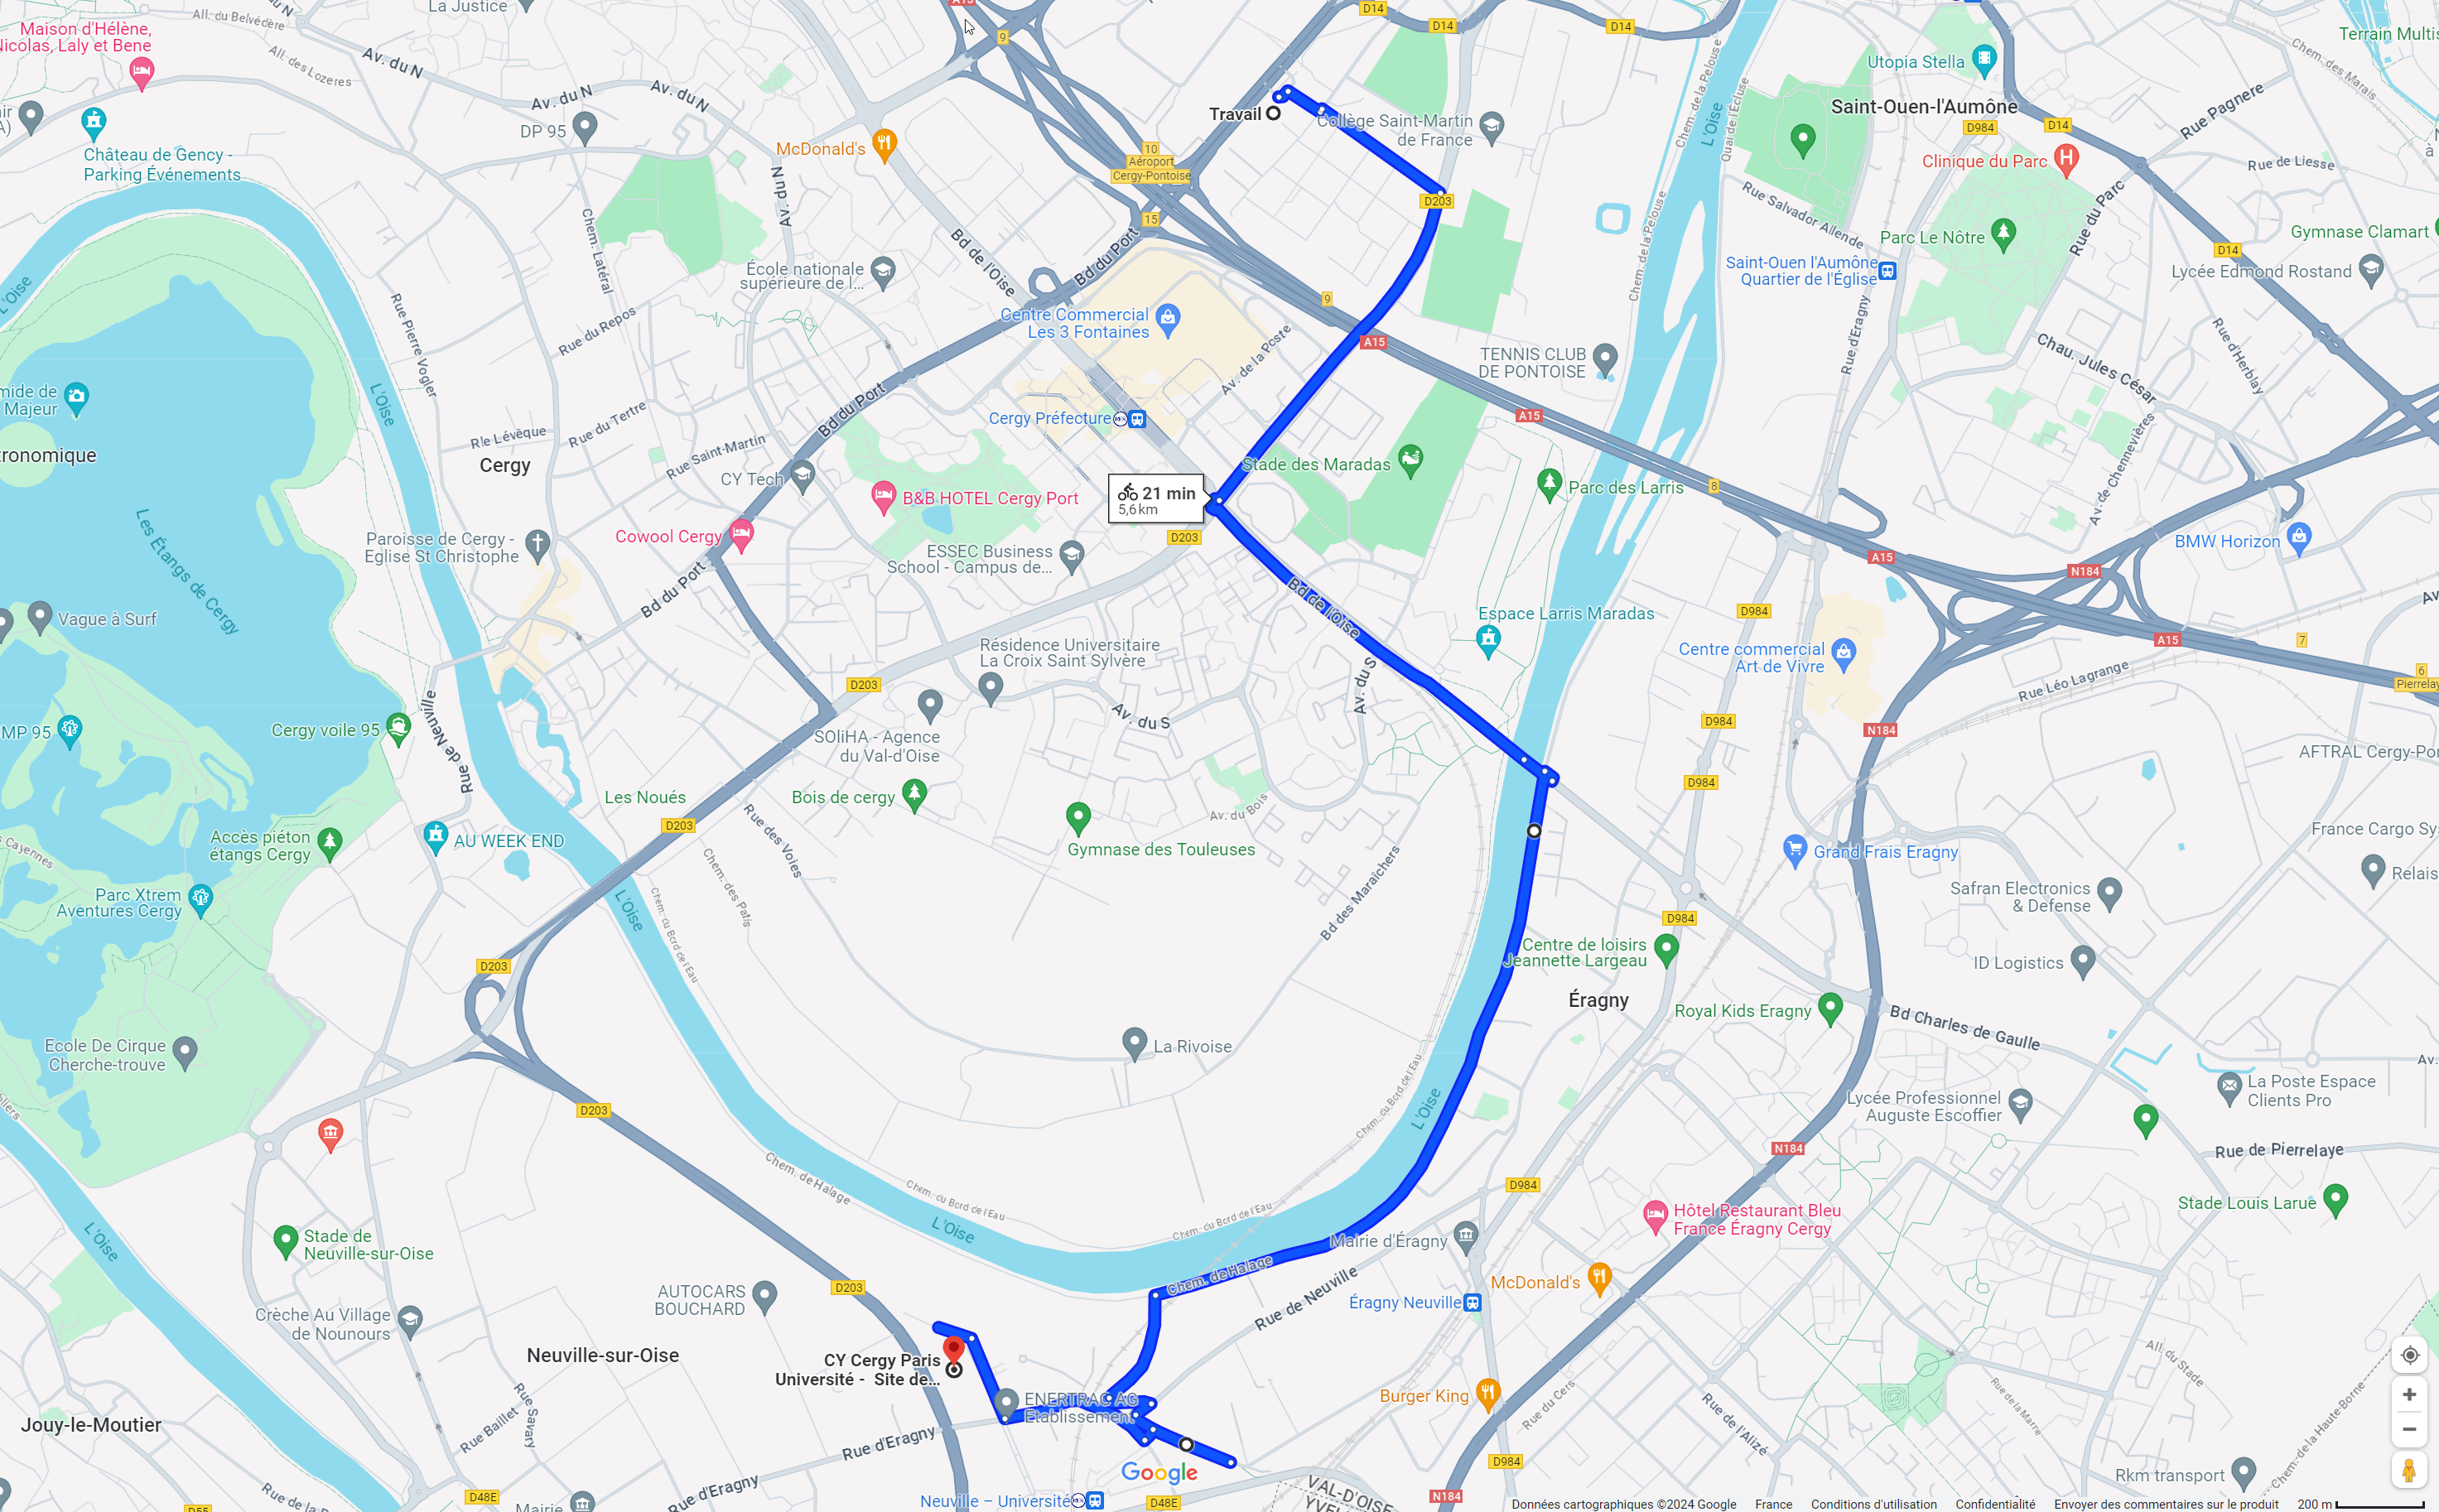 Parcours-Inter-Campus-MAI-A-VELO-I-GBIUTCERGYPONTOISE.png